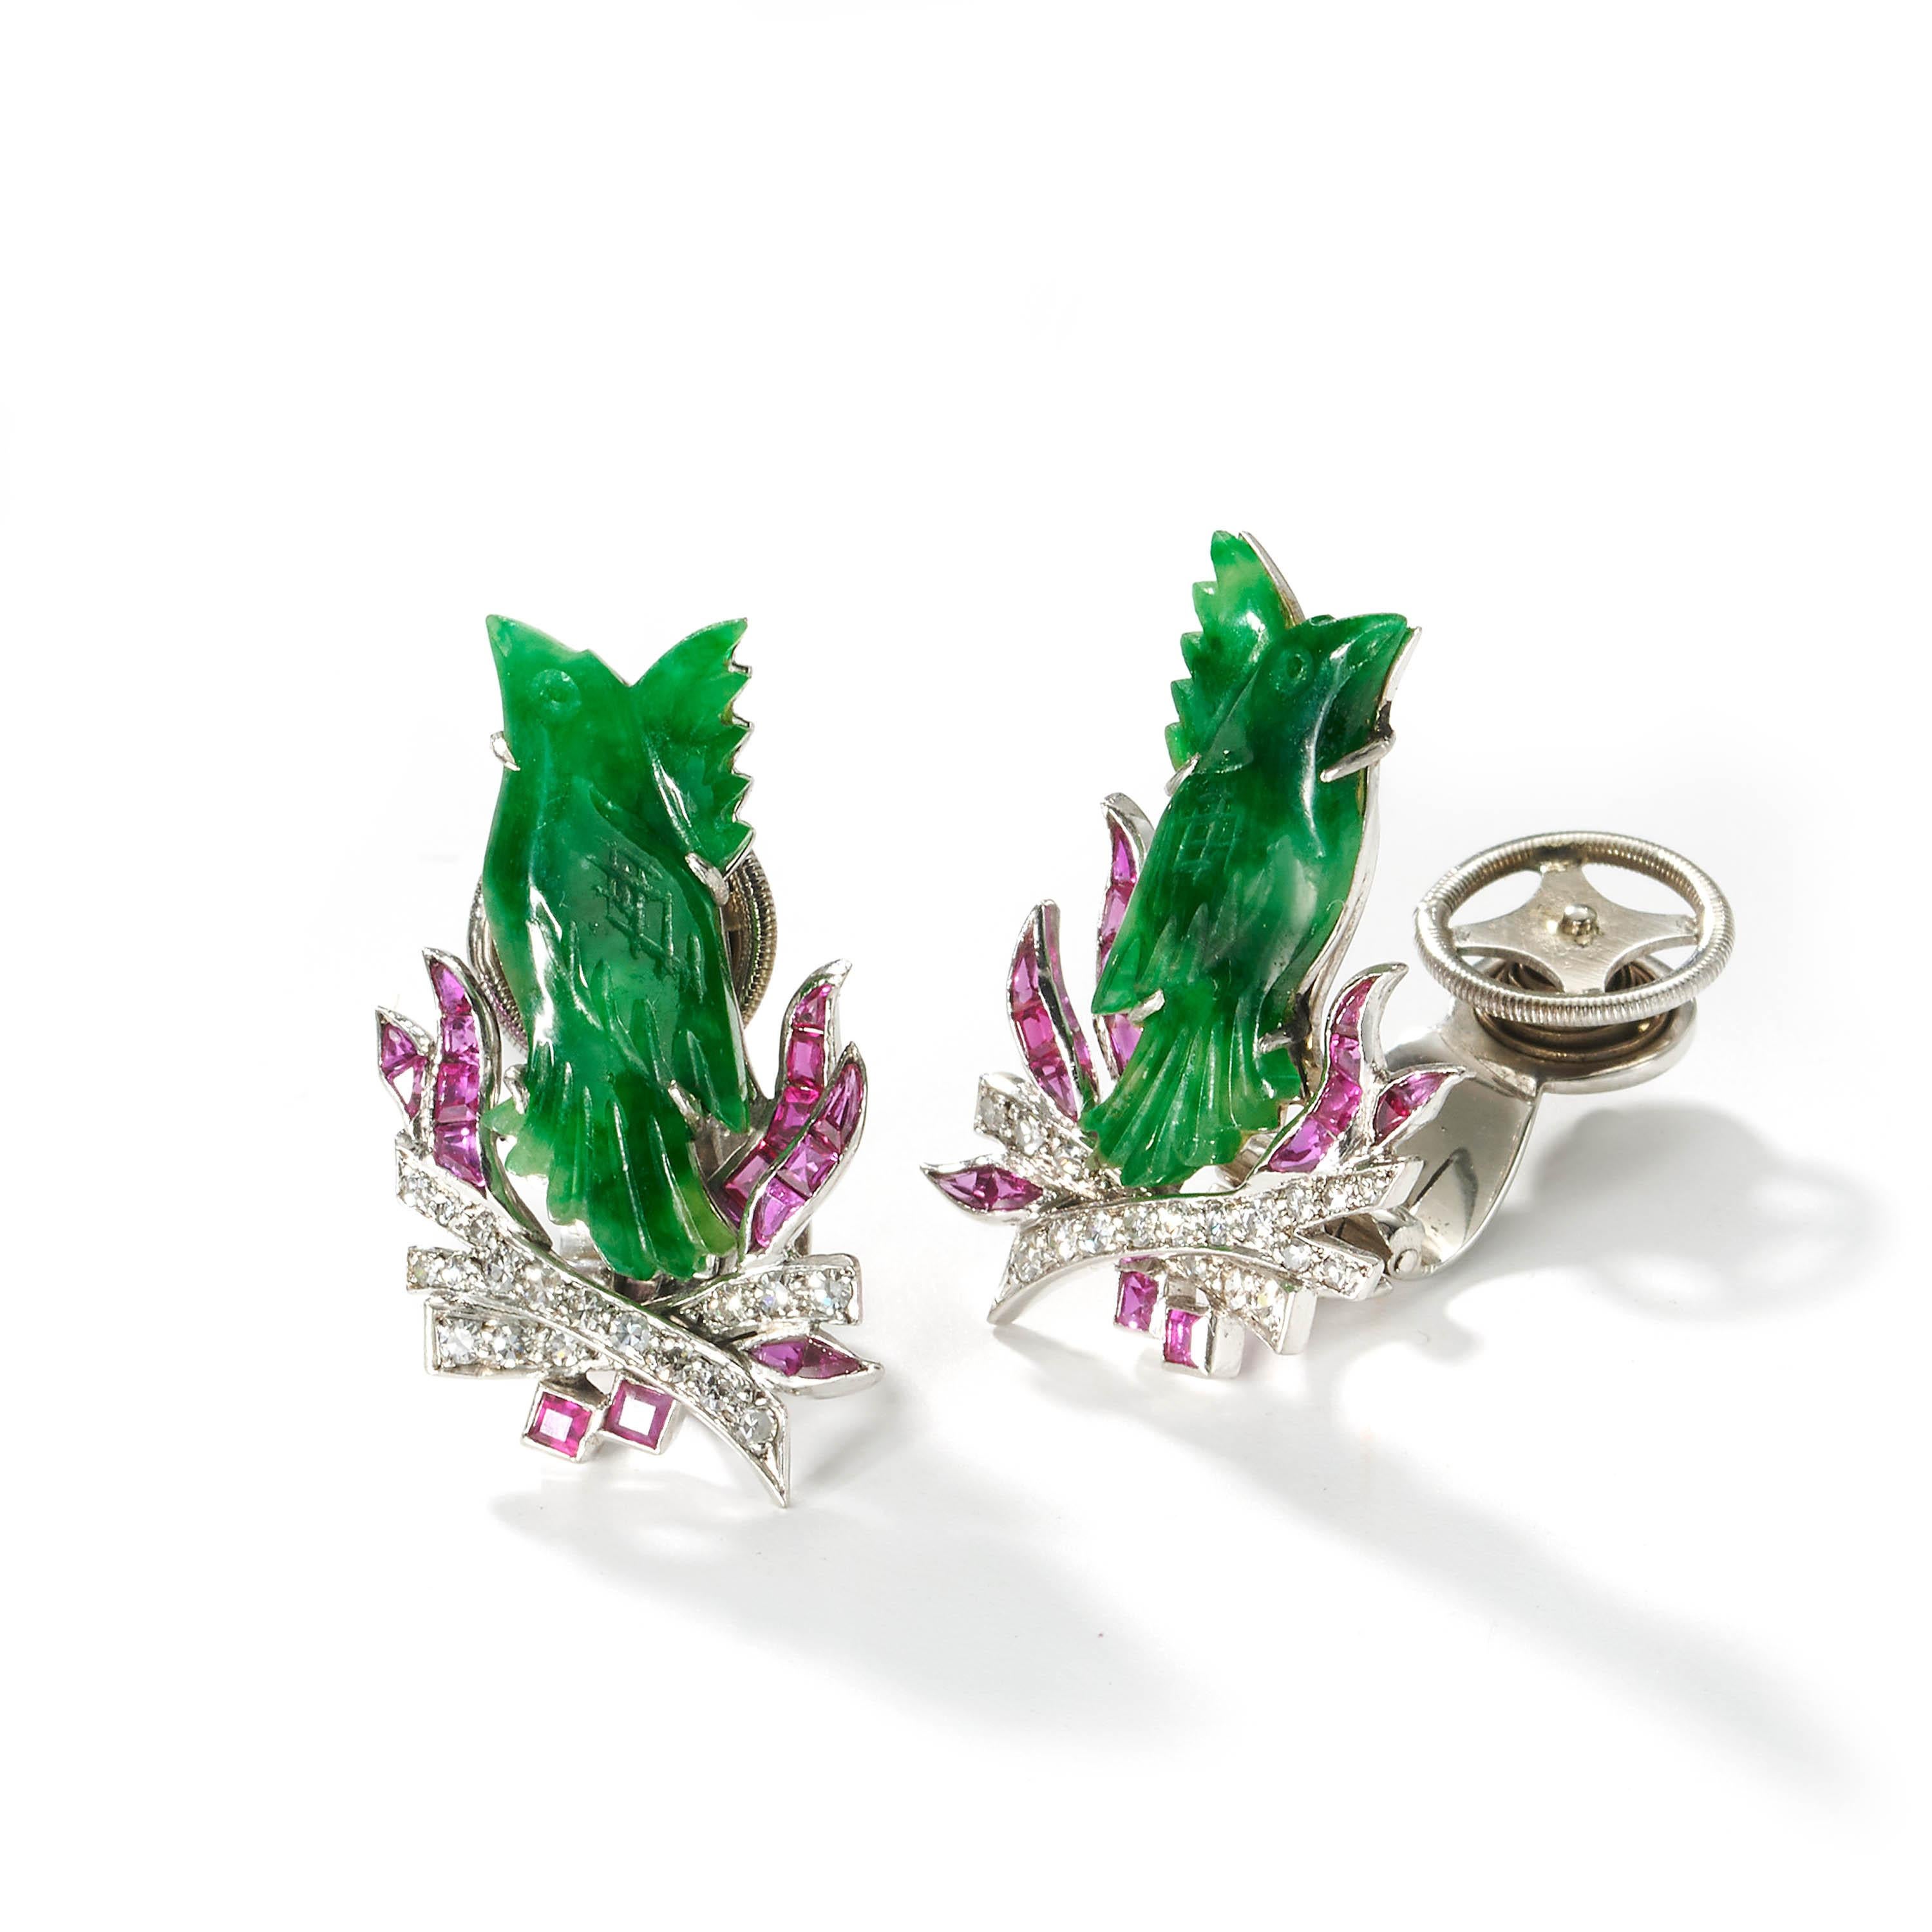 A pair of Art Deco jade, ruby and diamond earrings, set with jadeite jade carved Chinese phoenix birds, on eight-cut diamond set branches, with calibré cut ruby, channel set flames, mounted in platinum, with white gold clip-on fittings, with sprung